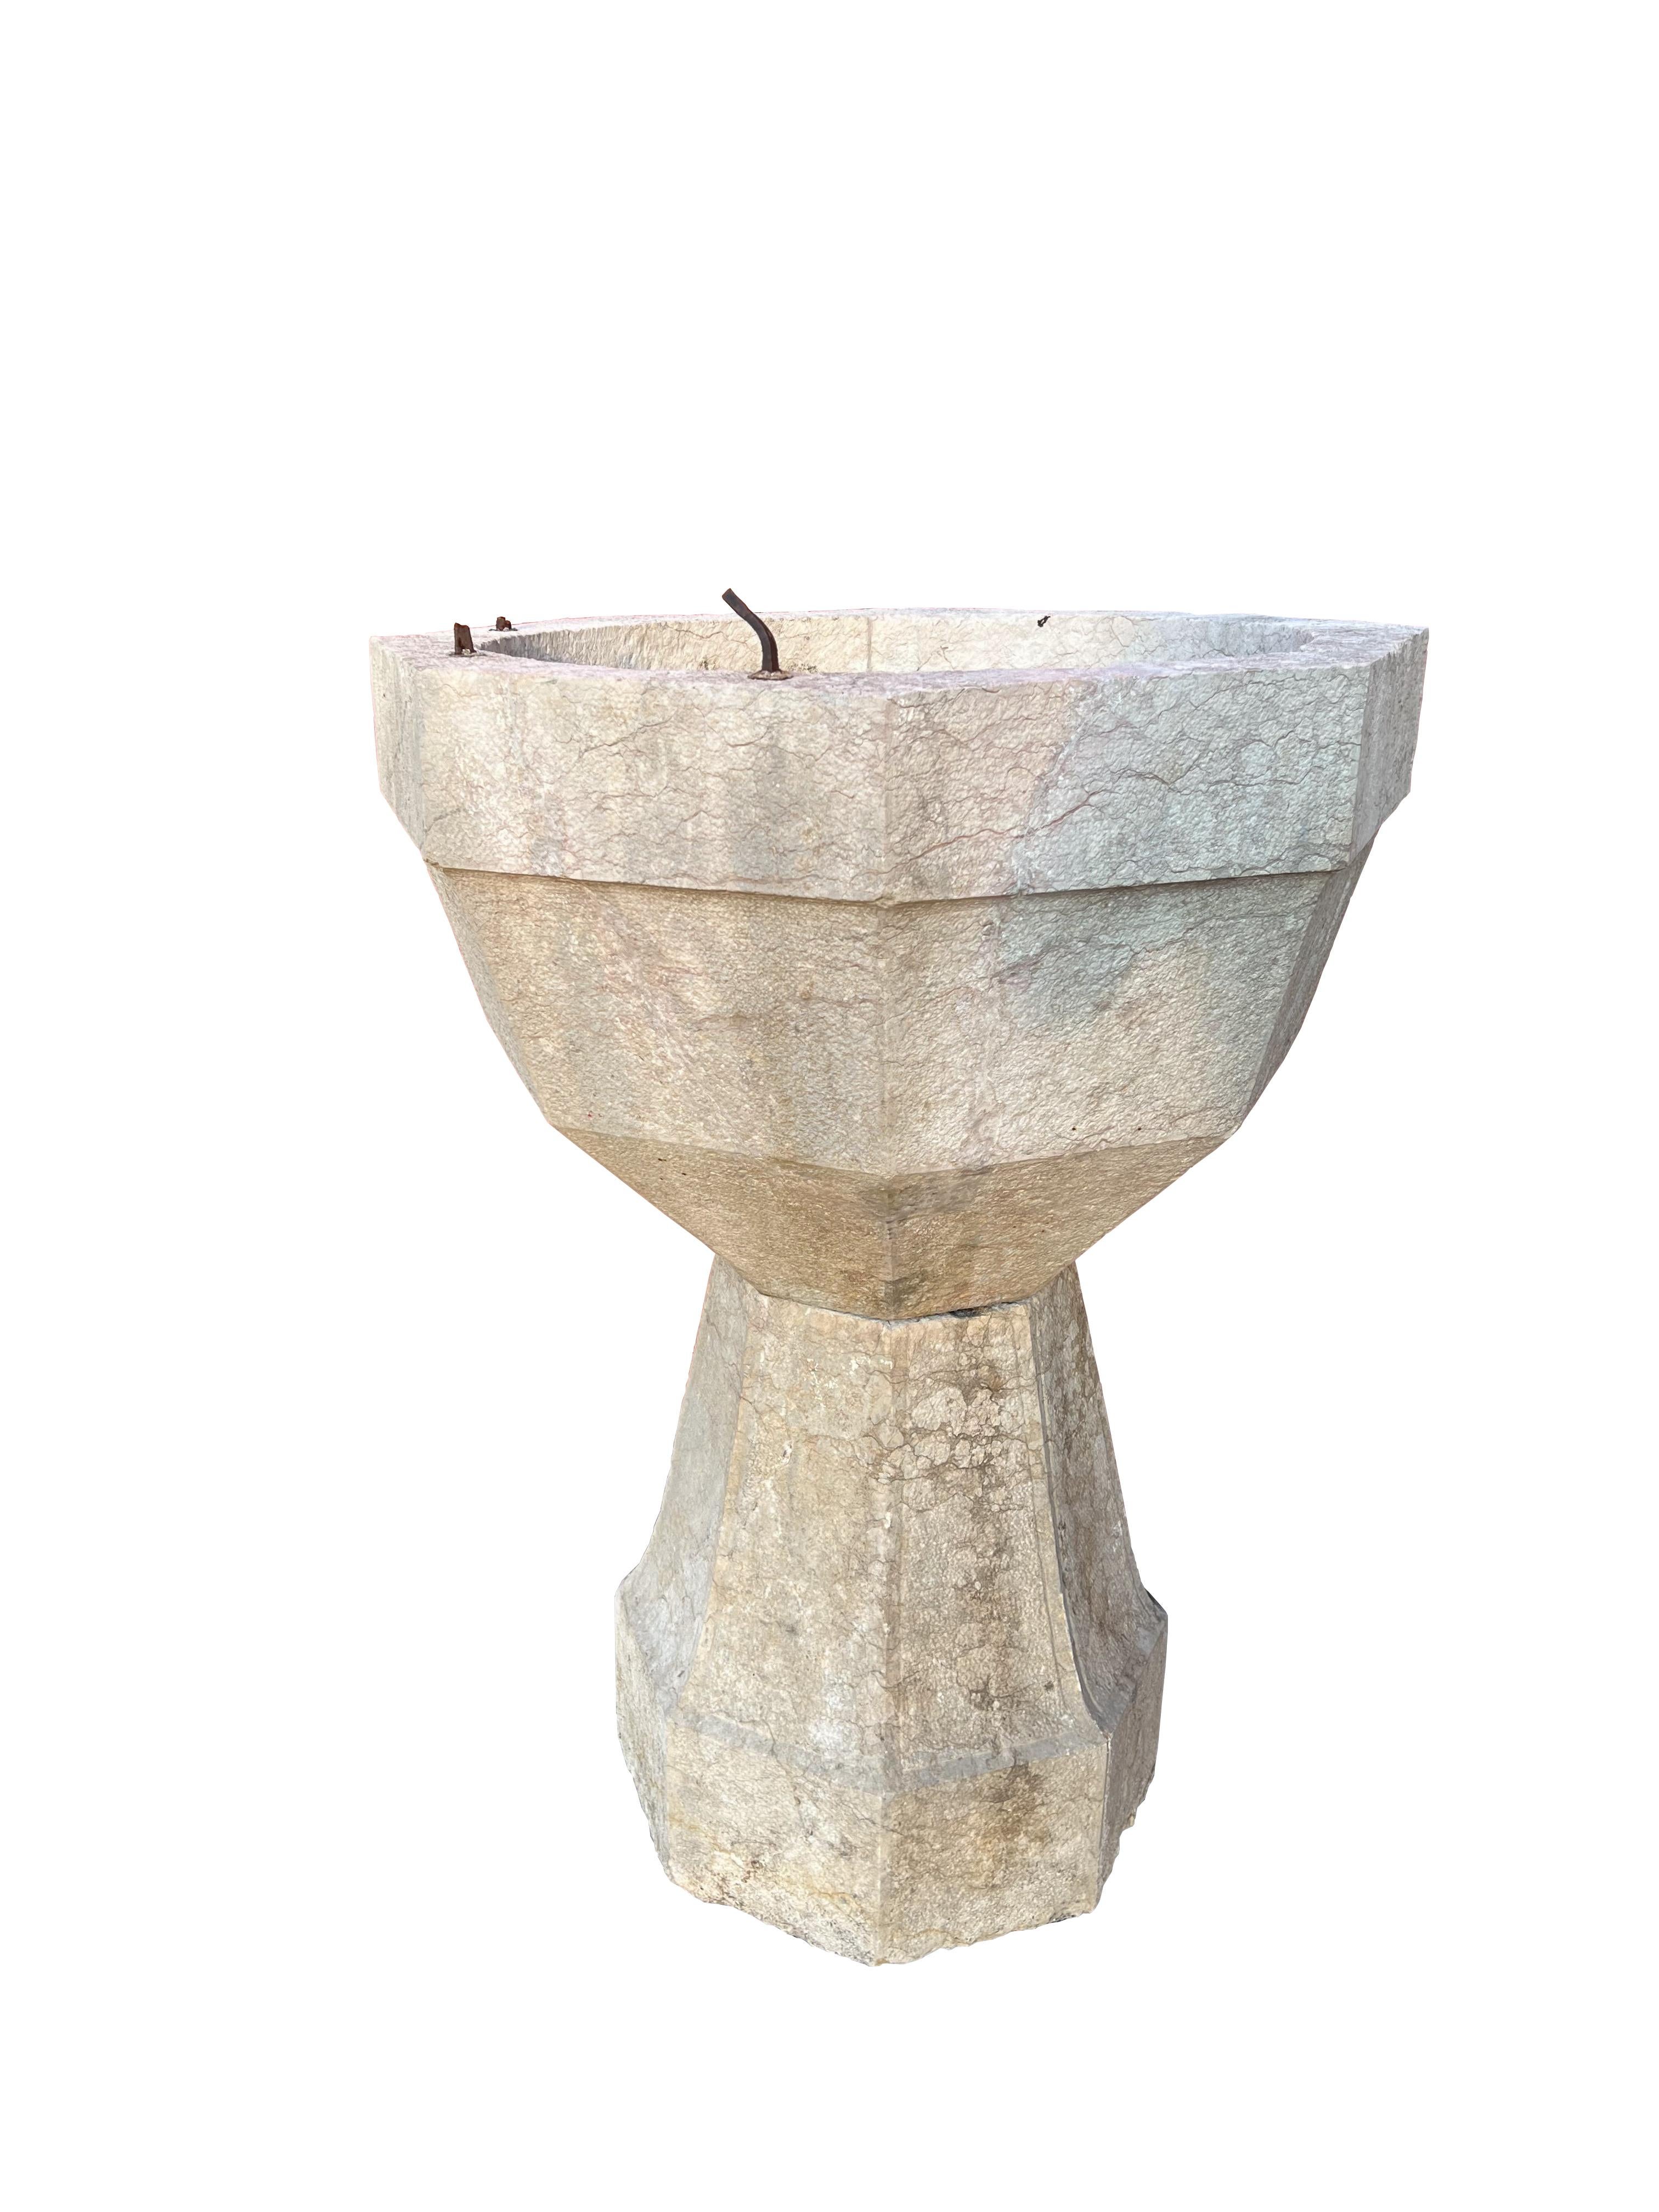 Embossed Italian Antique Octagonal Marble Well For Sale